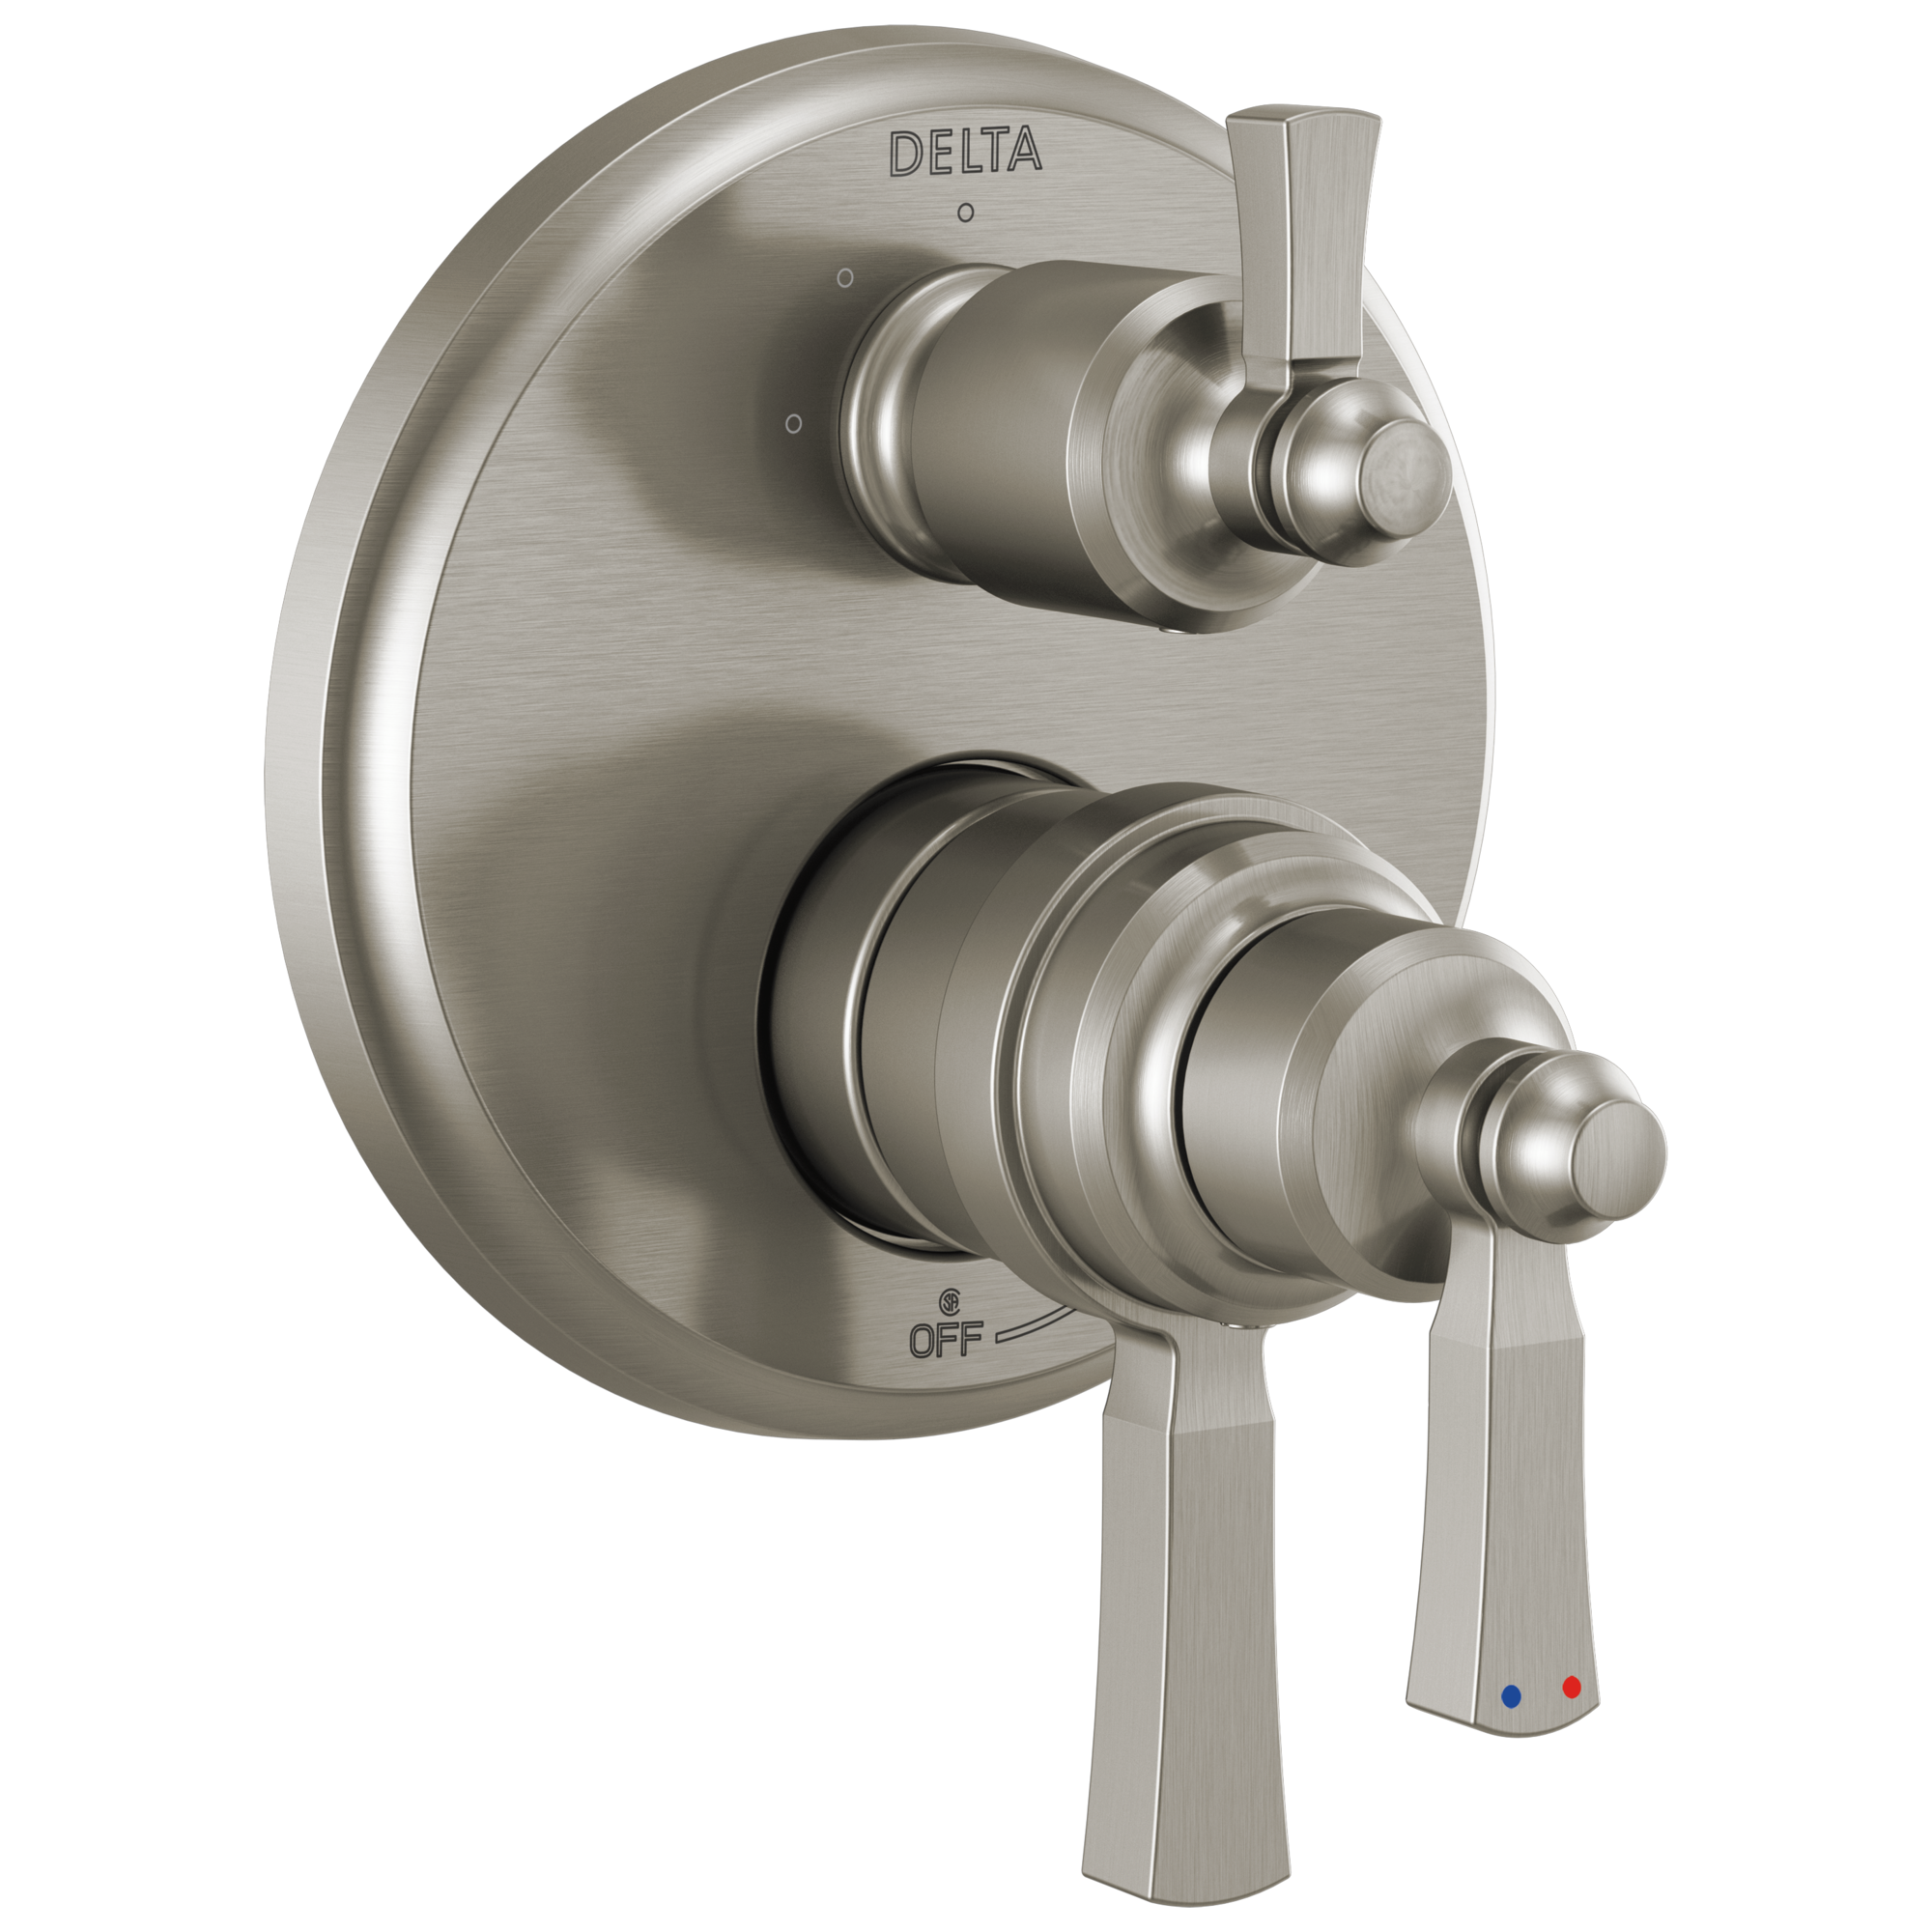 Delta Dorval: Traditional 2-Handle Monitor 17T Series Valve Trim with 3 Setting Diverter